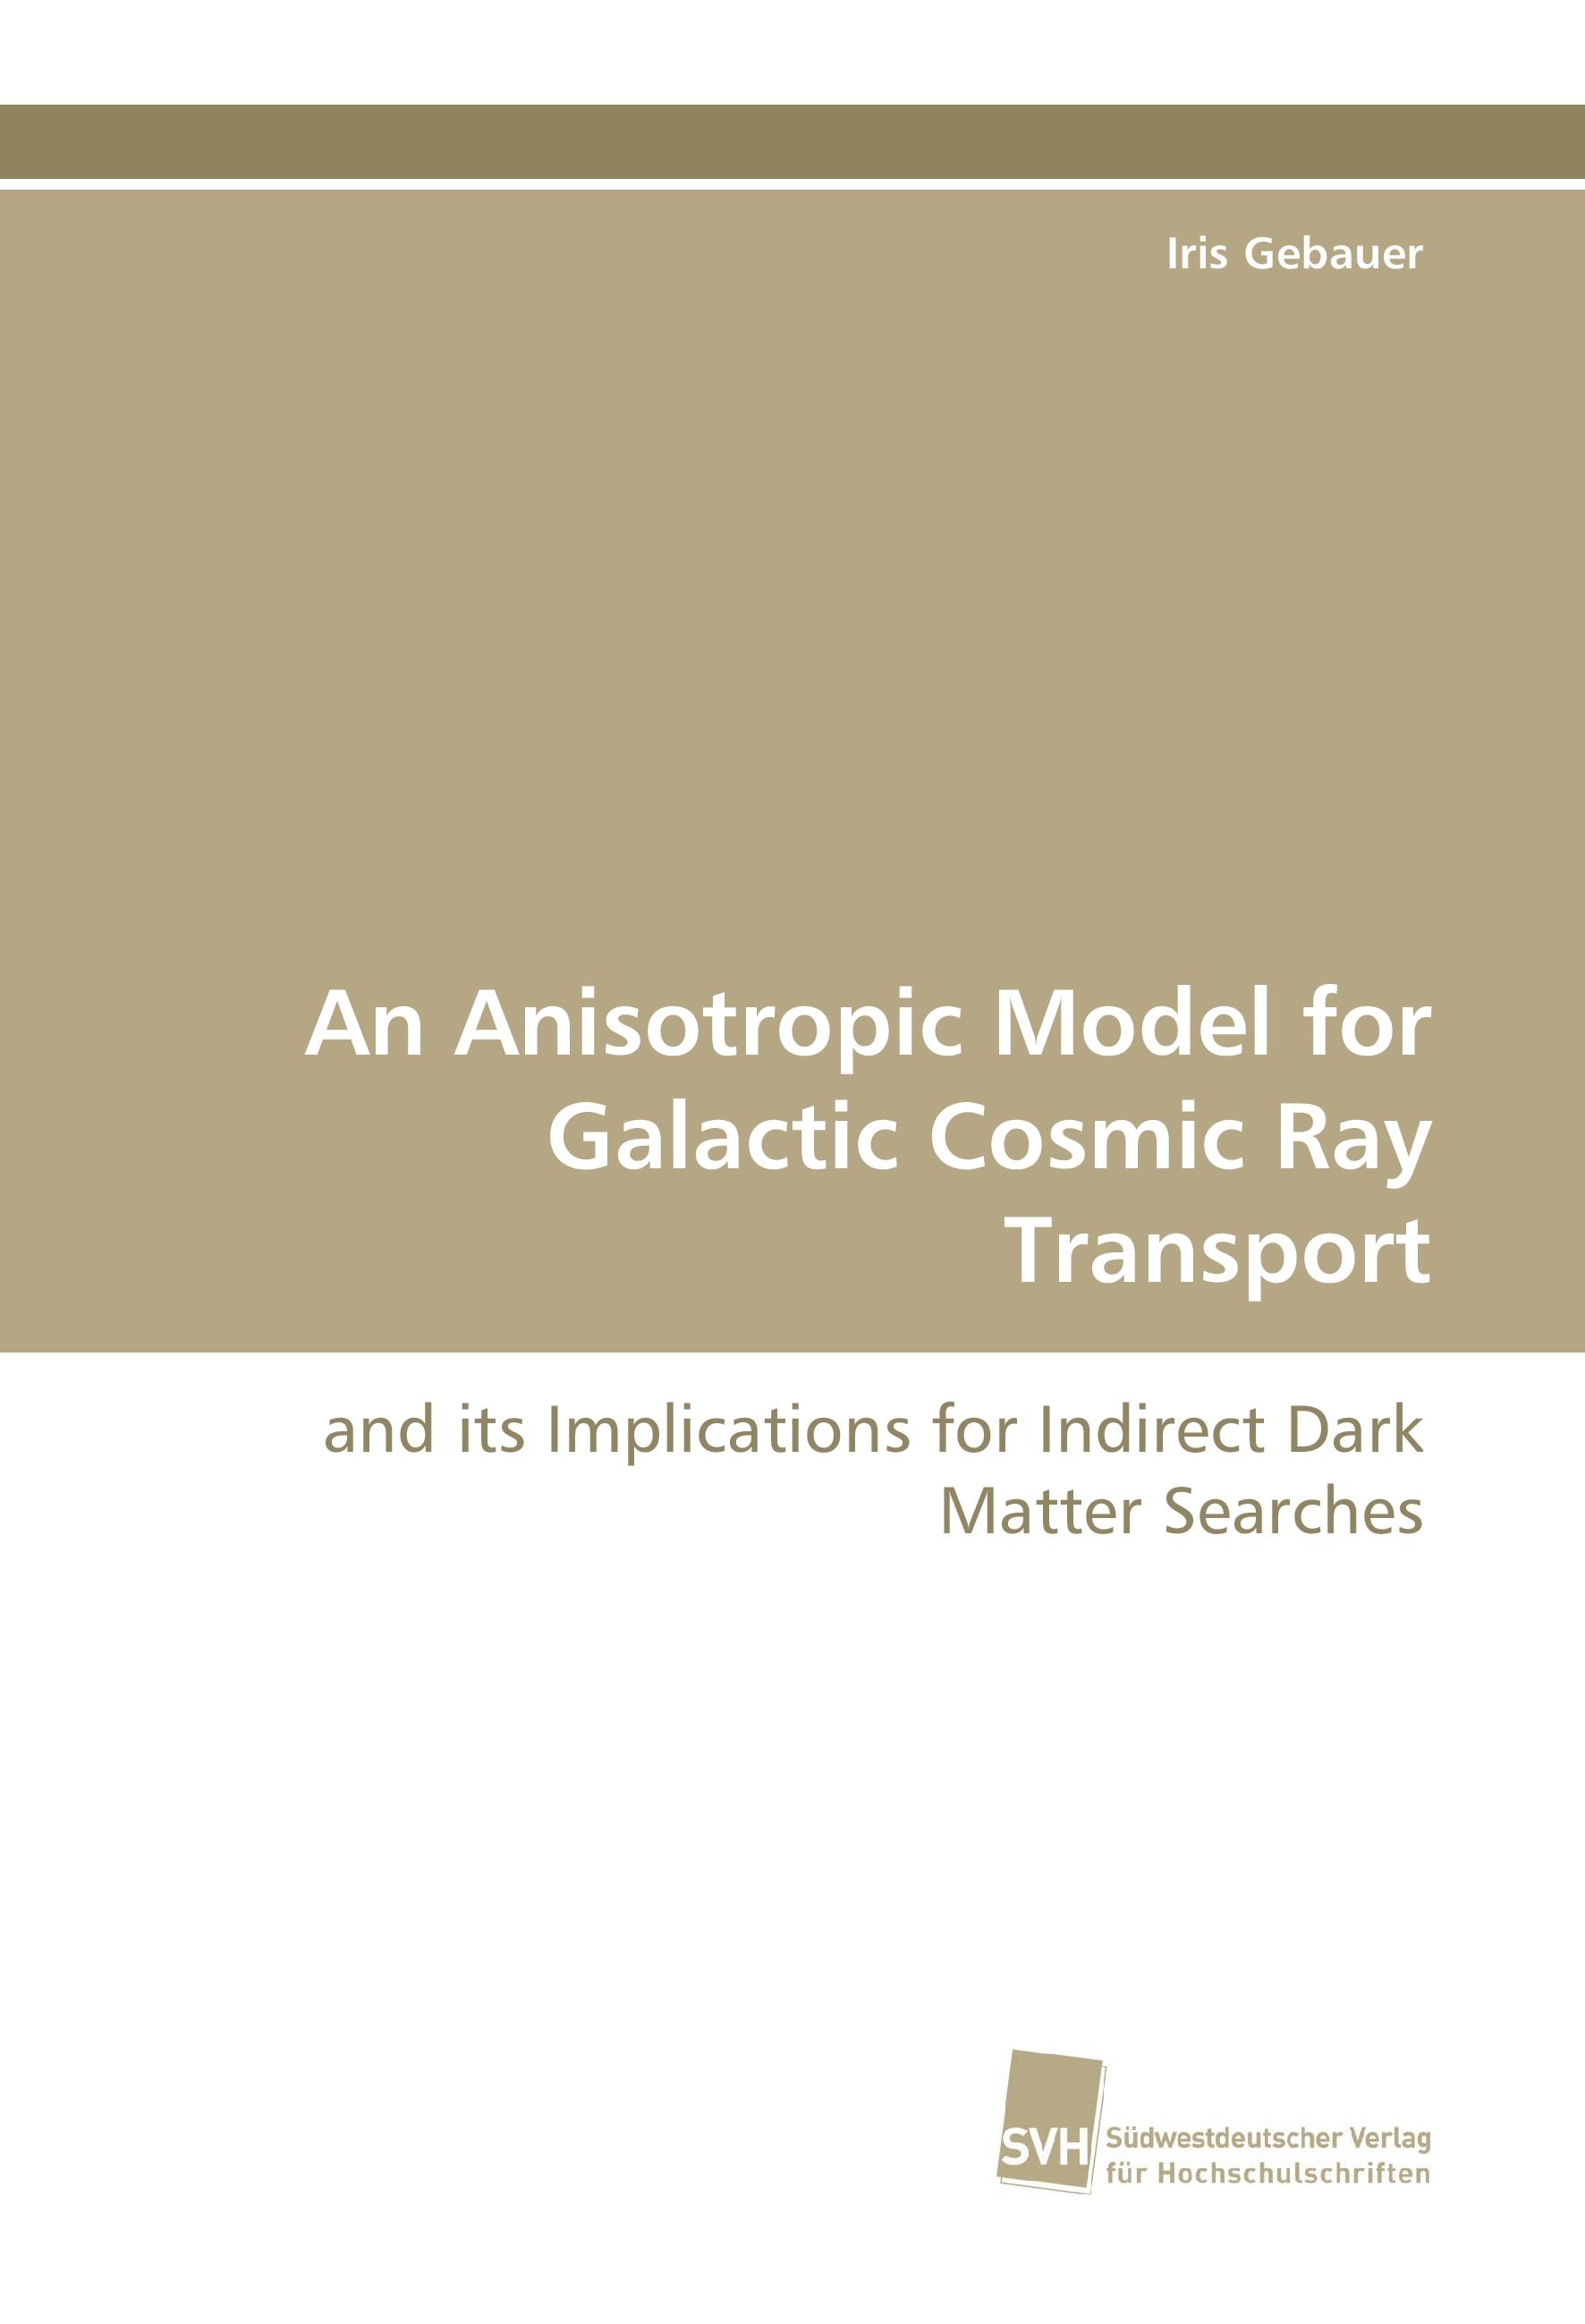 An Anisotropic Model for Galactic Cosmic Ray Transport | and its Implications for Indirect Dark Matter Searches | Iris Gebauer | Taschenbuch | Paperback | 244 S. | Englisch | 2015 | EAN 9783838115290 - Gebauer, Iris